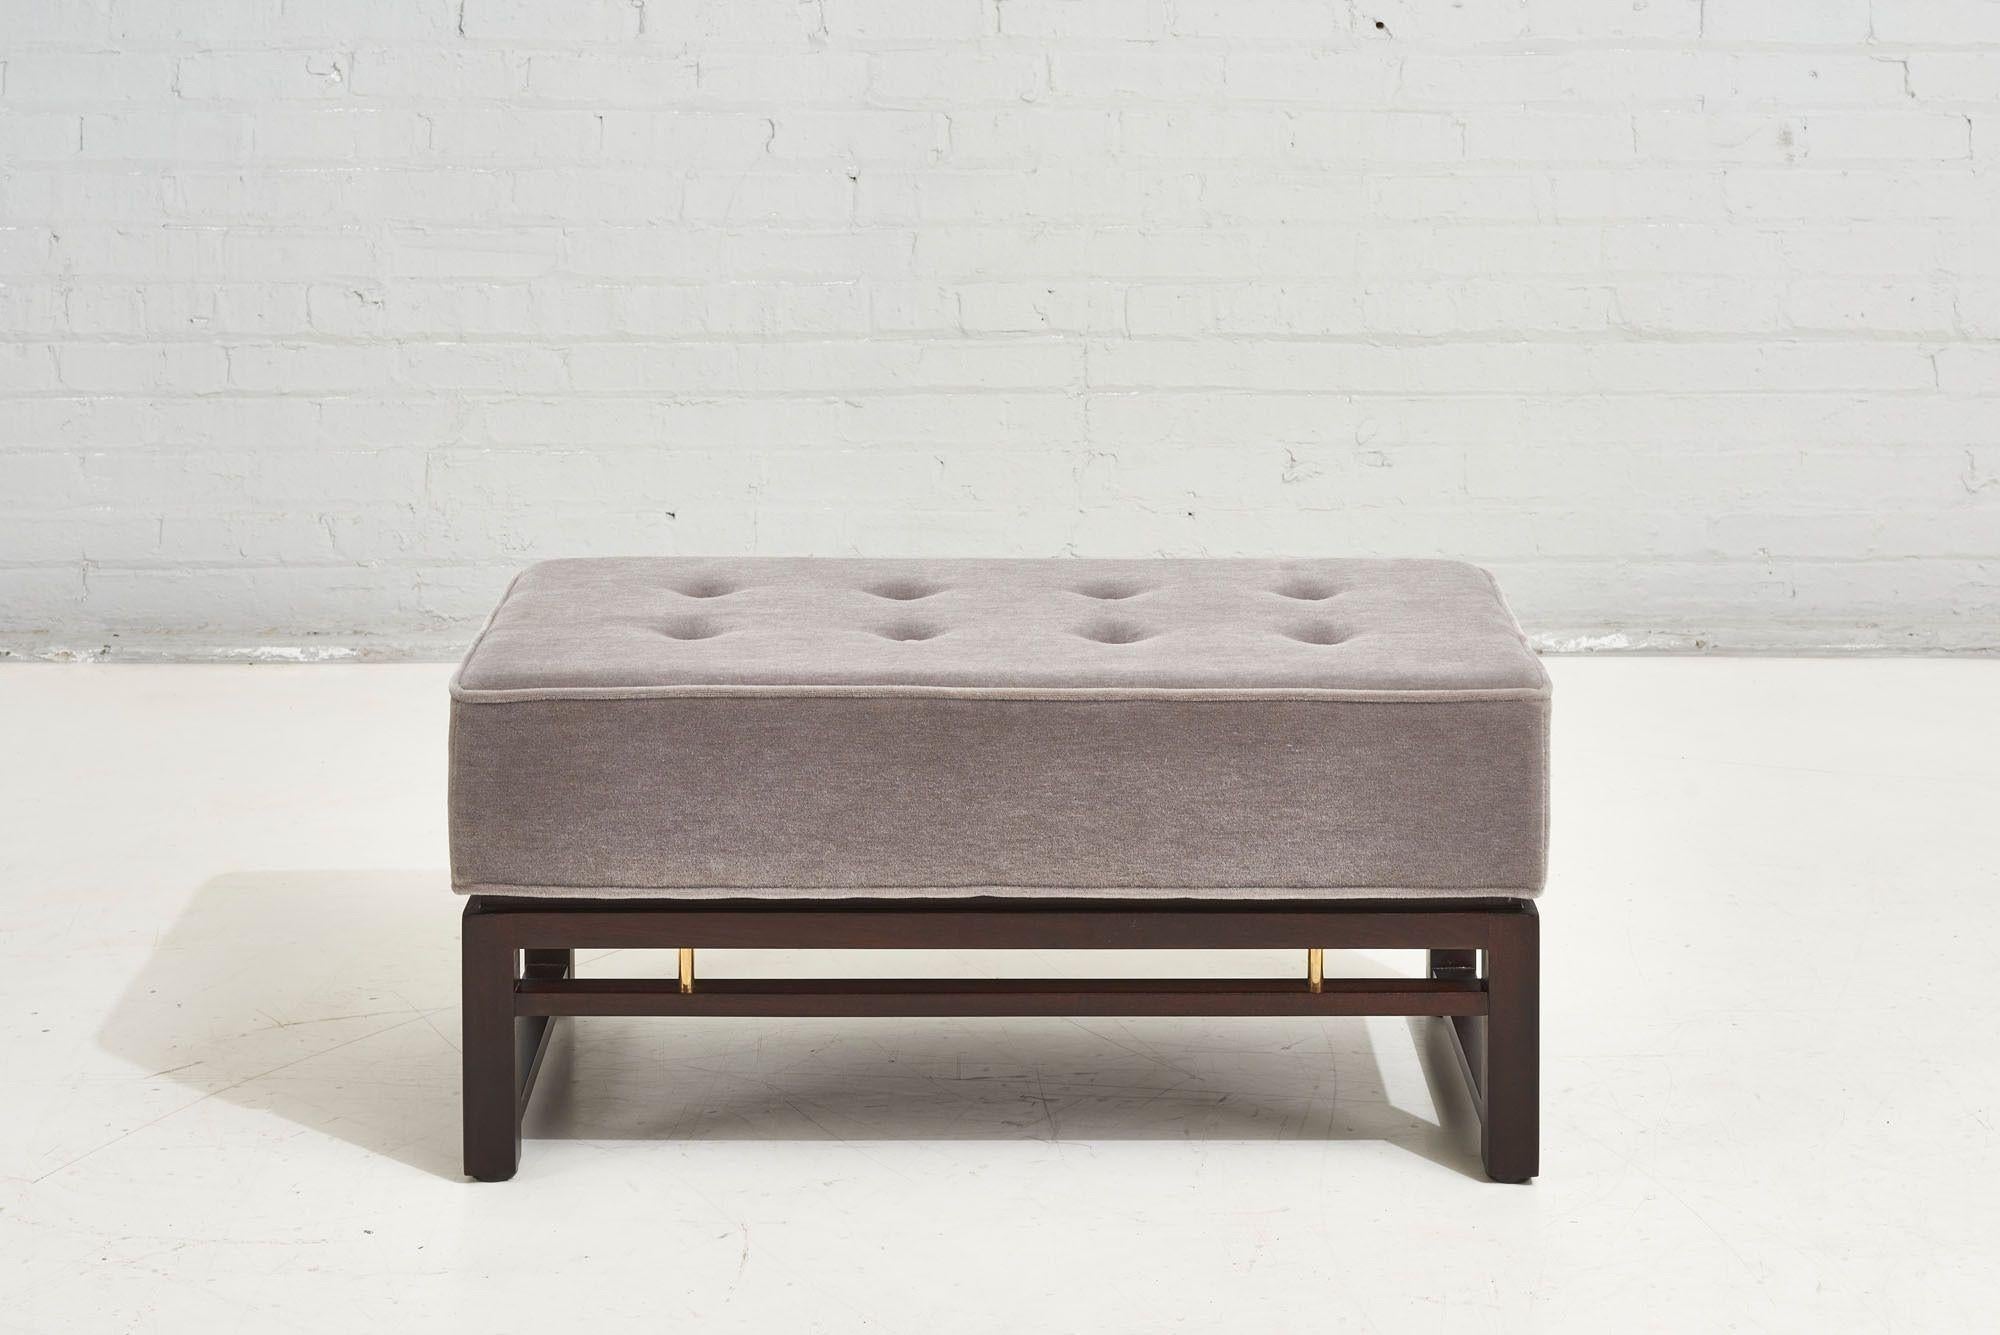 Edward Wormley for Dunbar Bench, 1960. Restored and reupholstered in gray mohair.